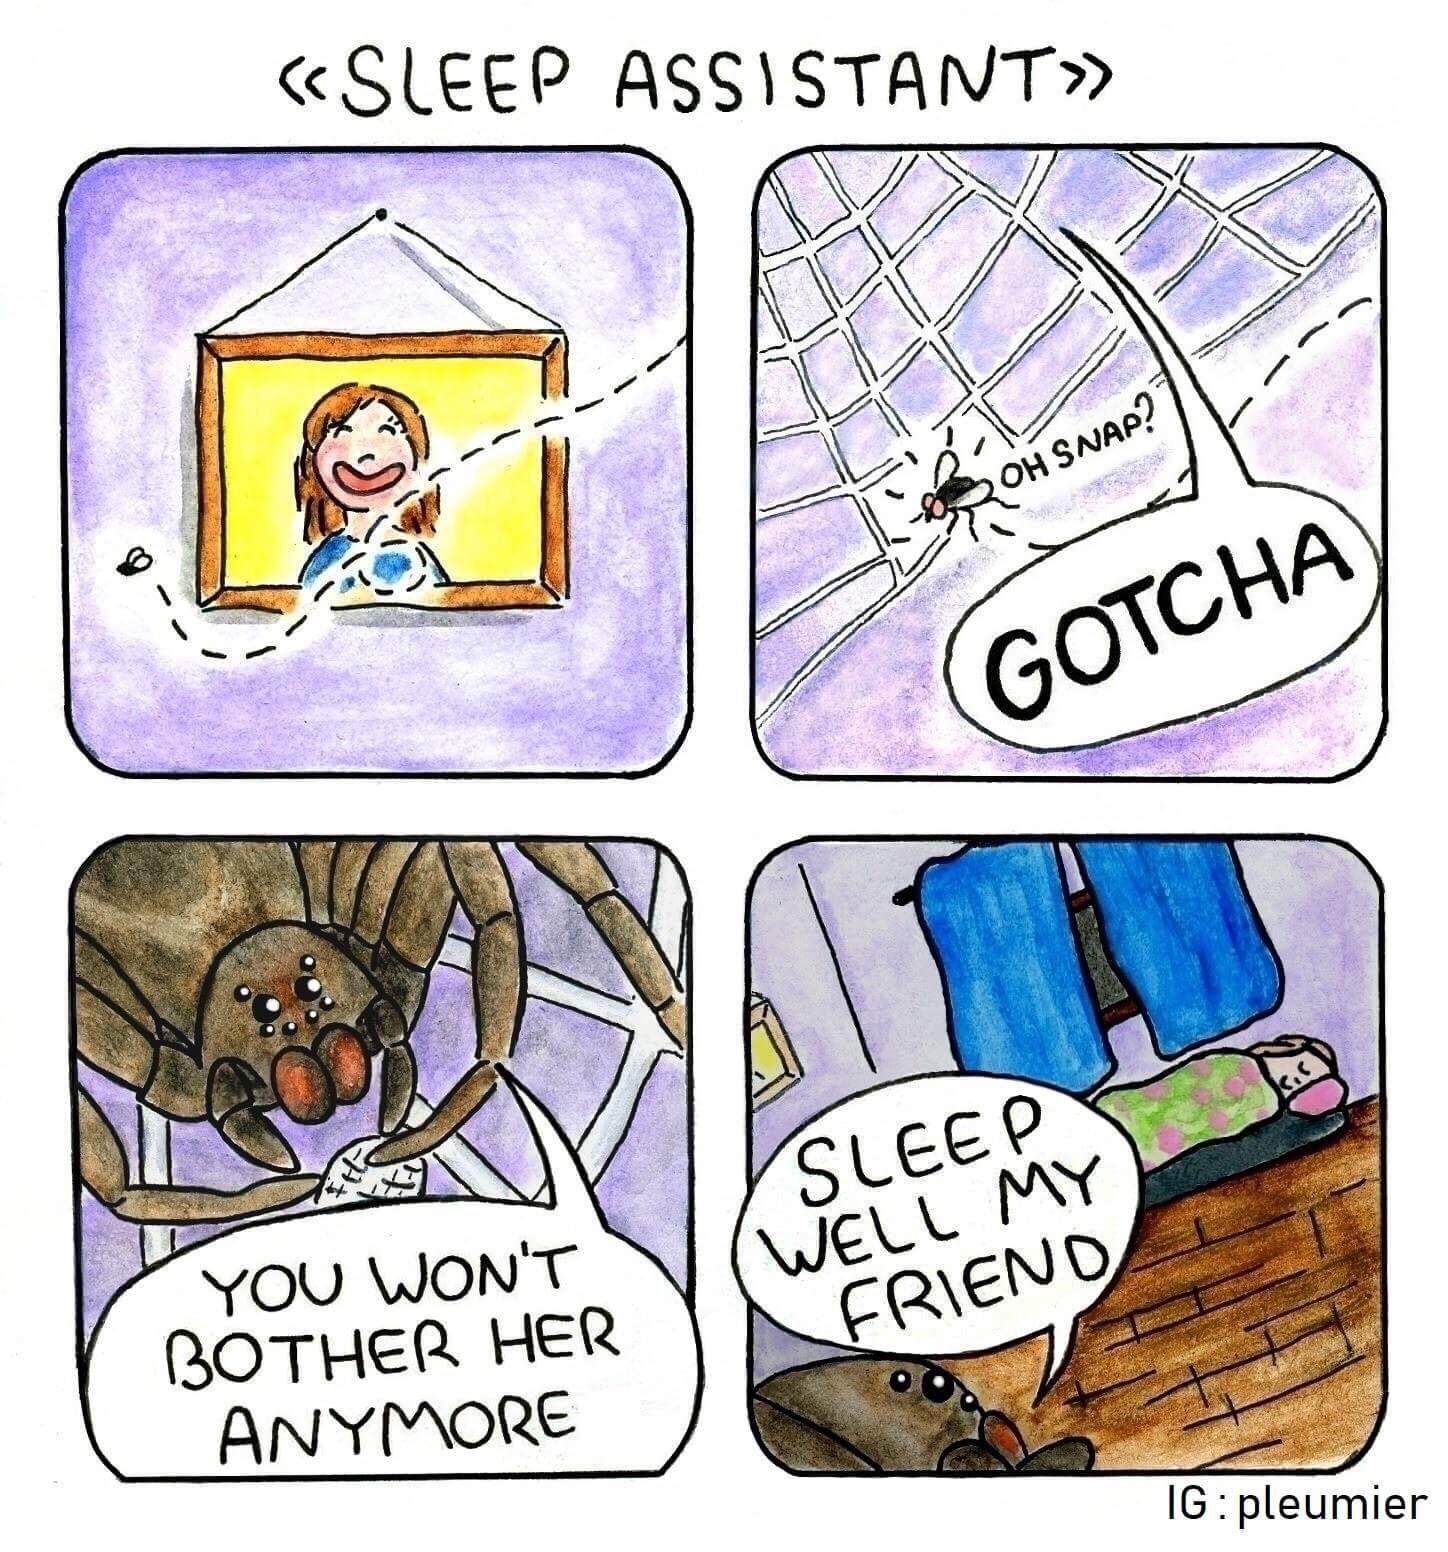 Spider protects in sleep